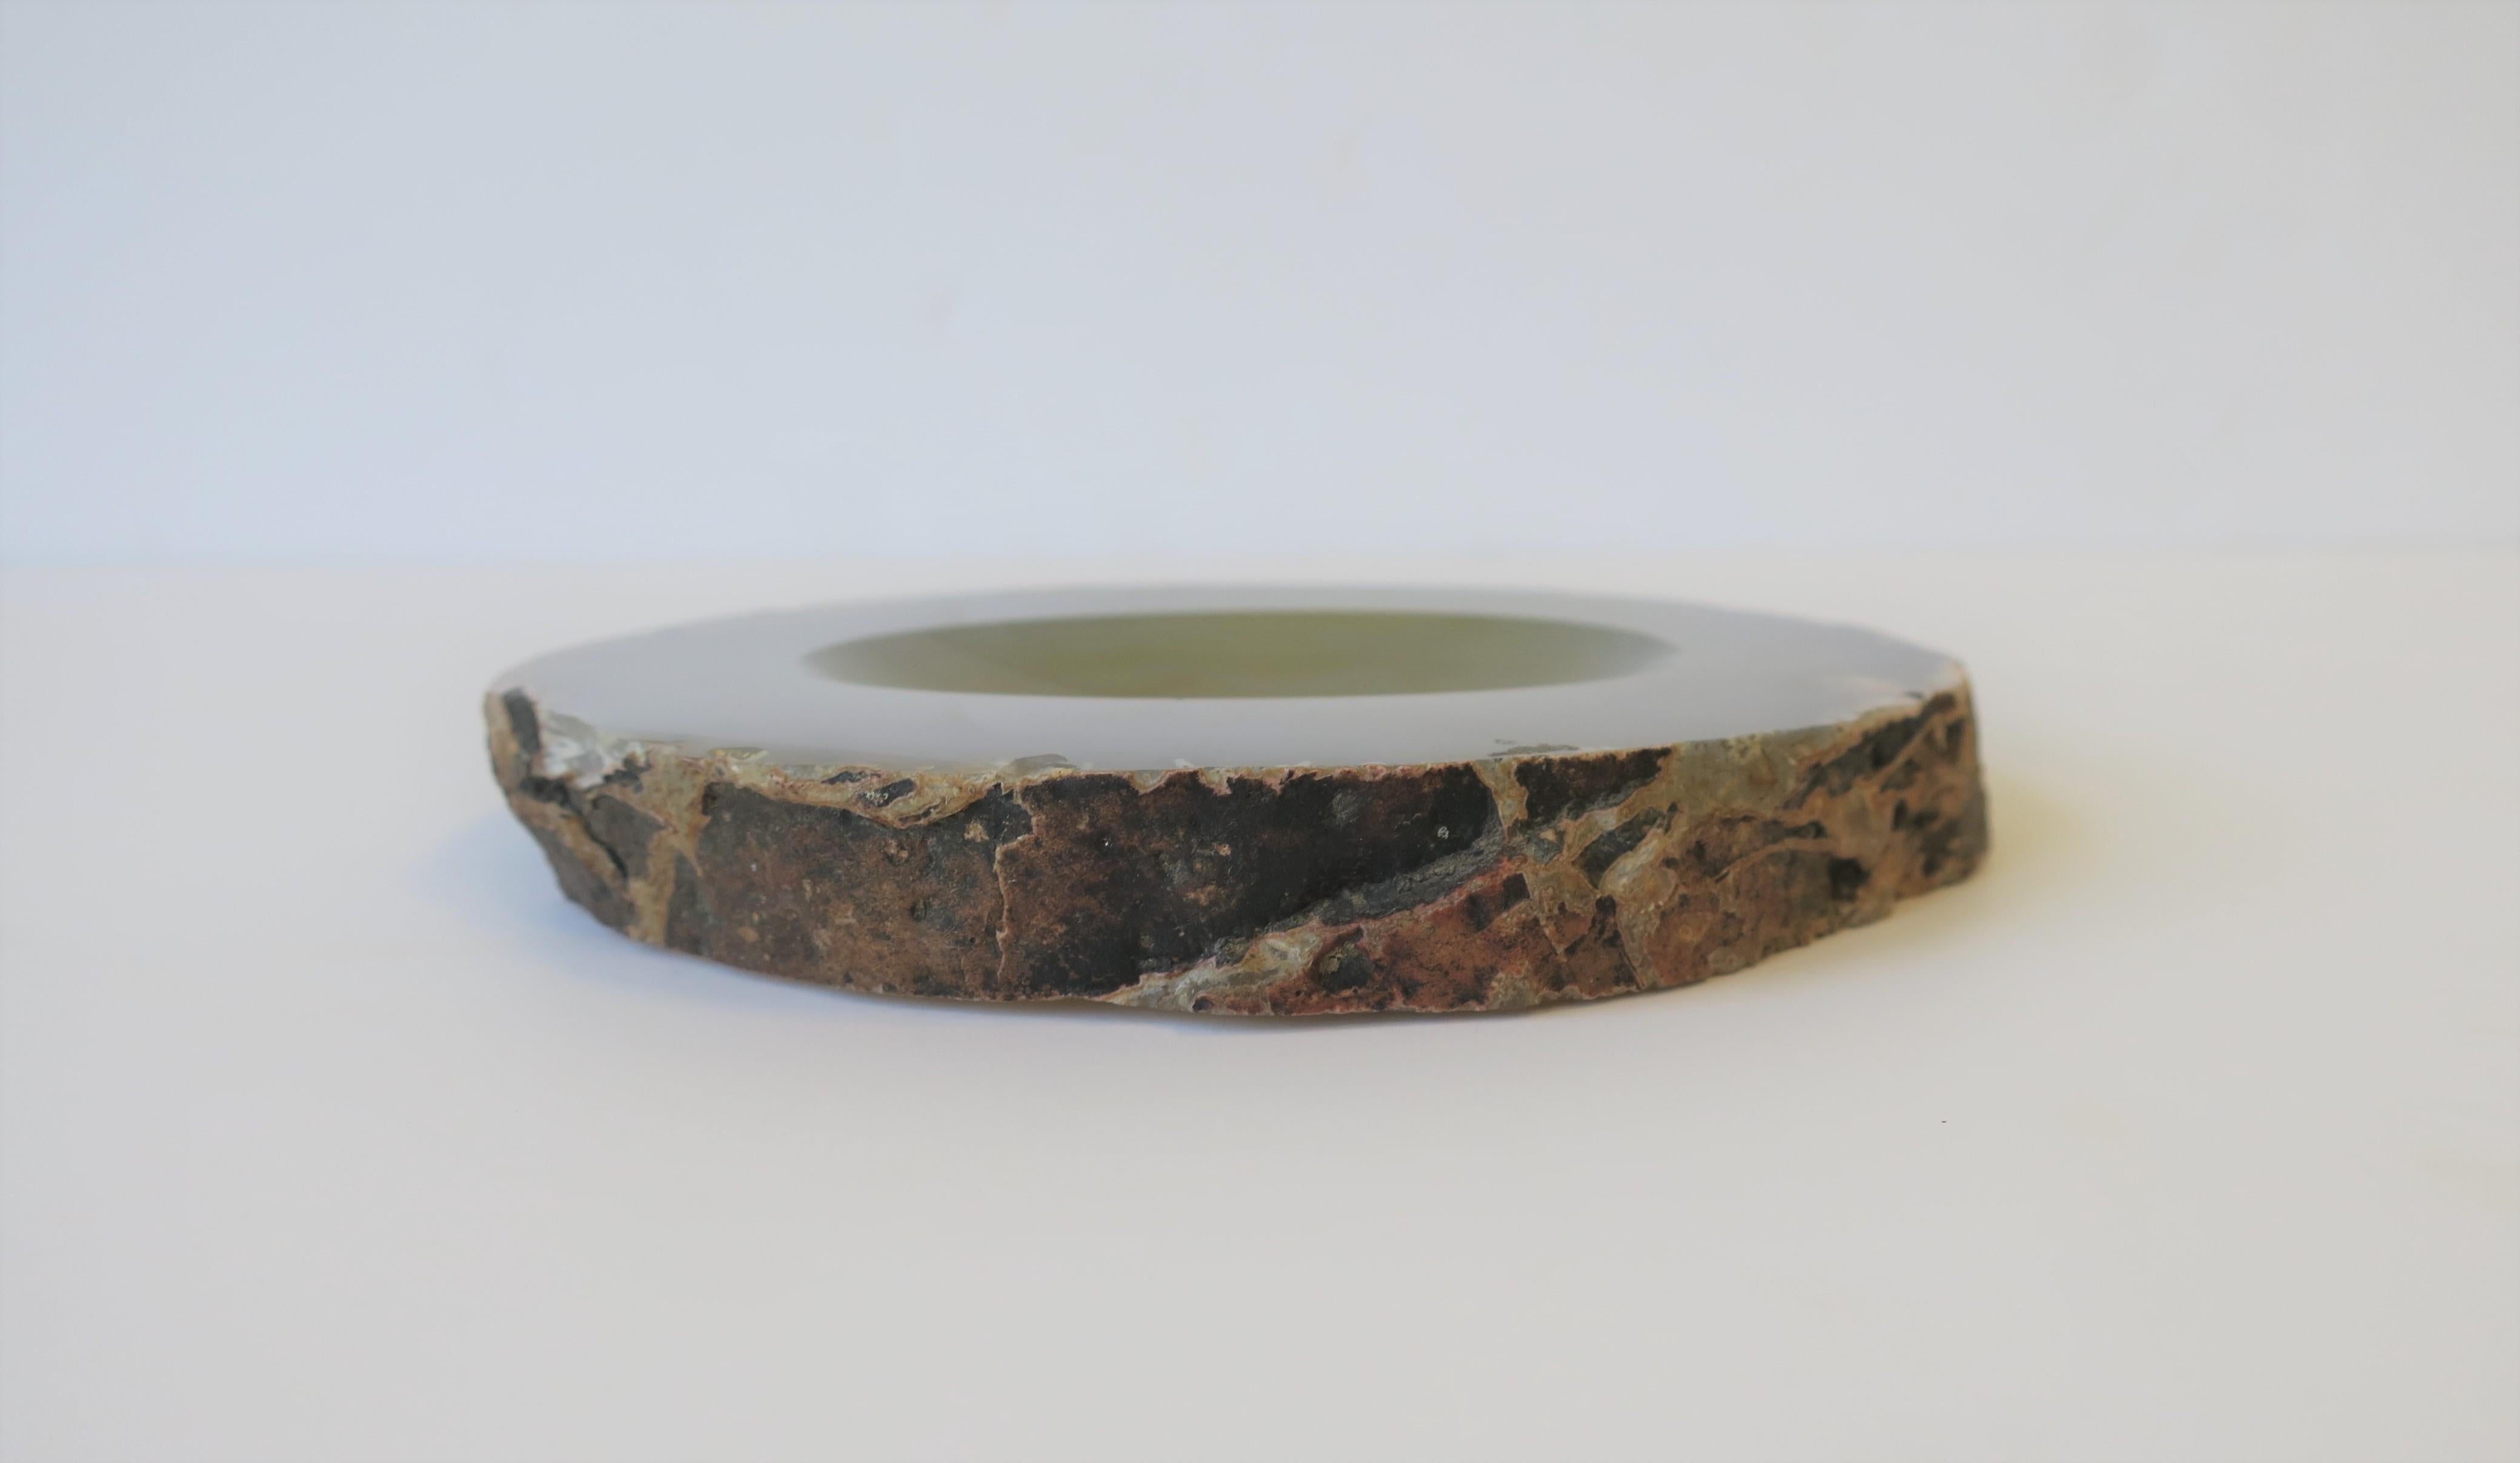 Grey Agate Vessel Bowl or Decorative Object 4